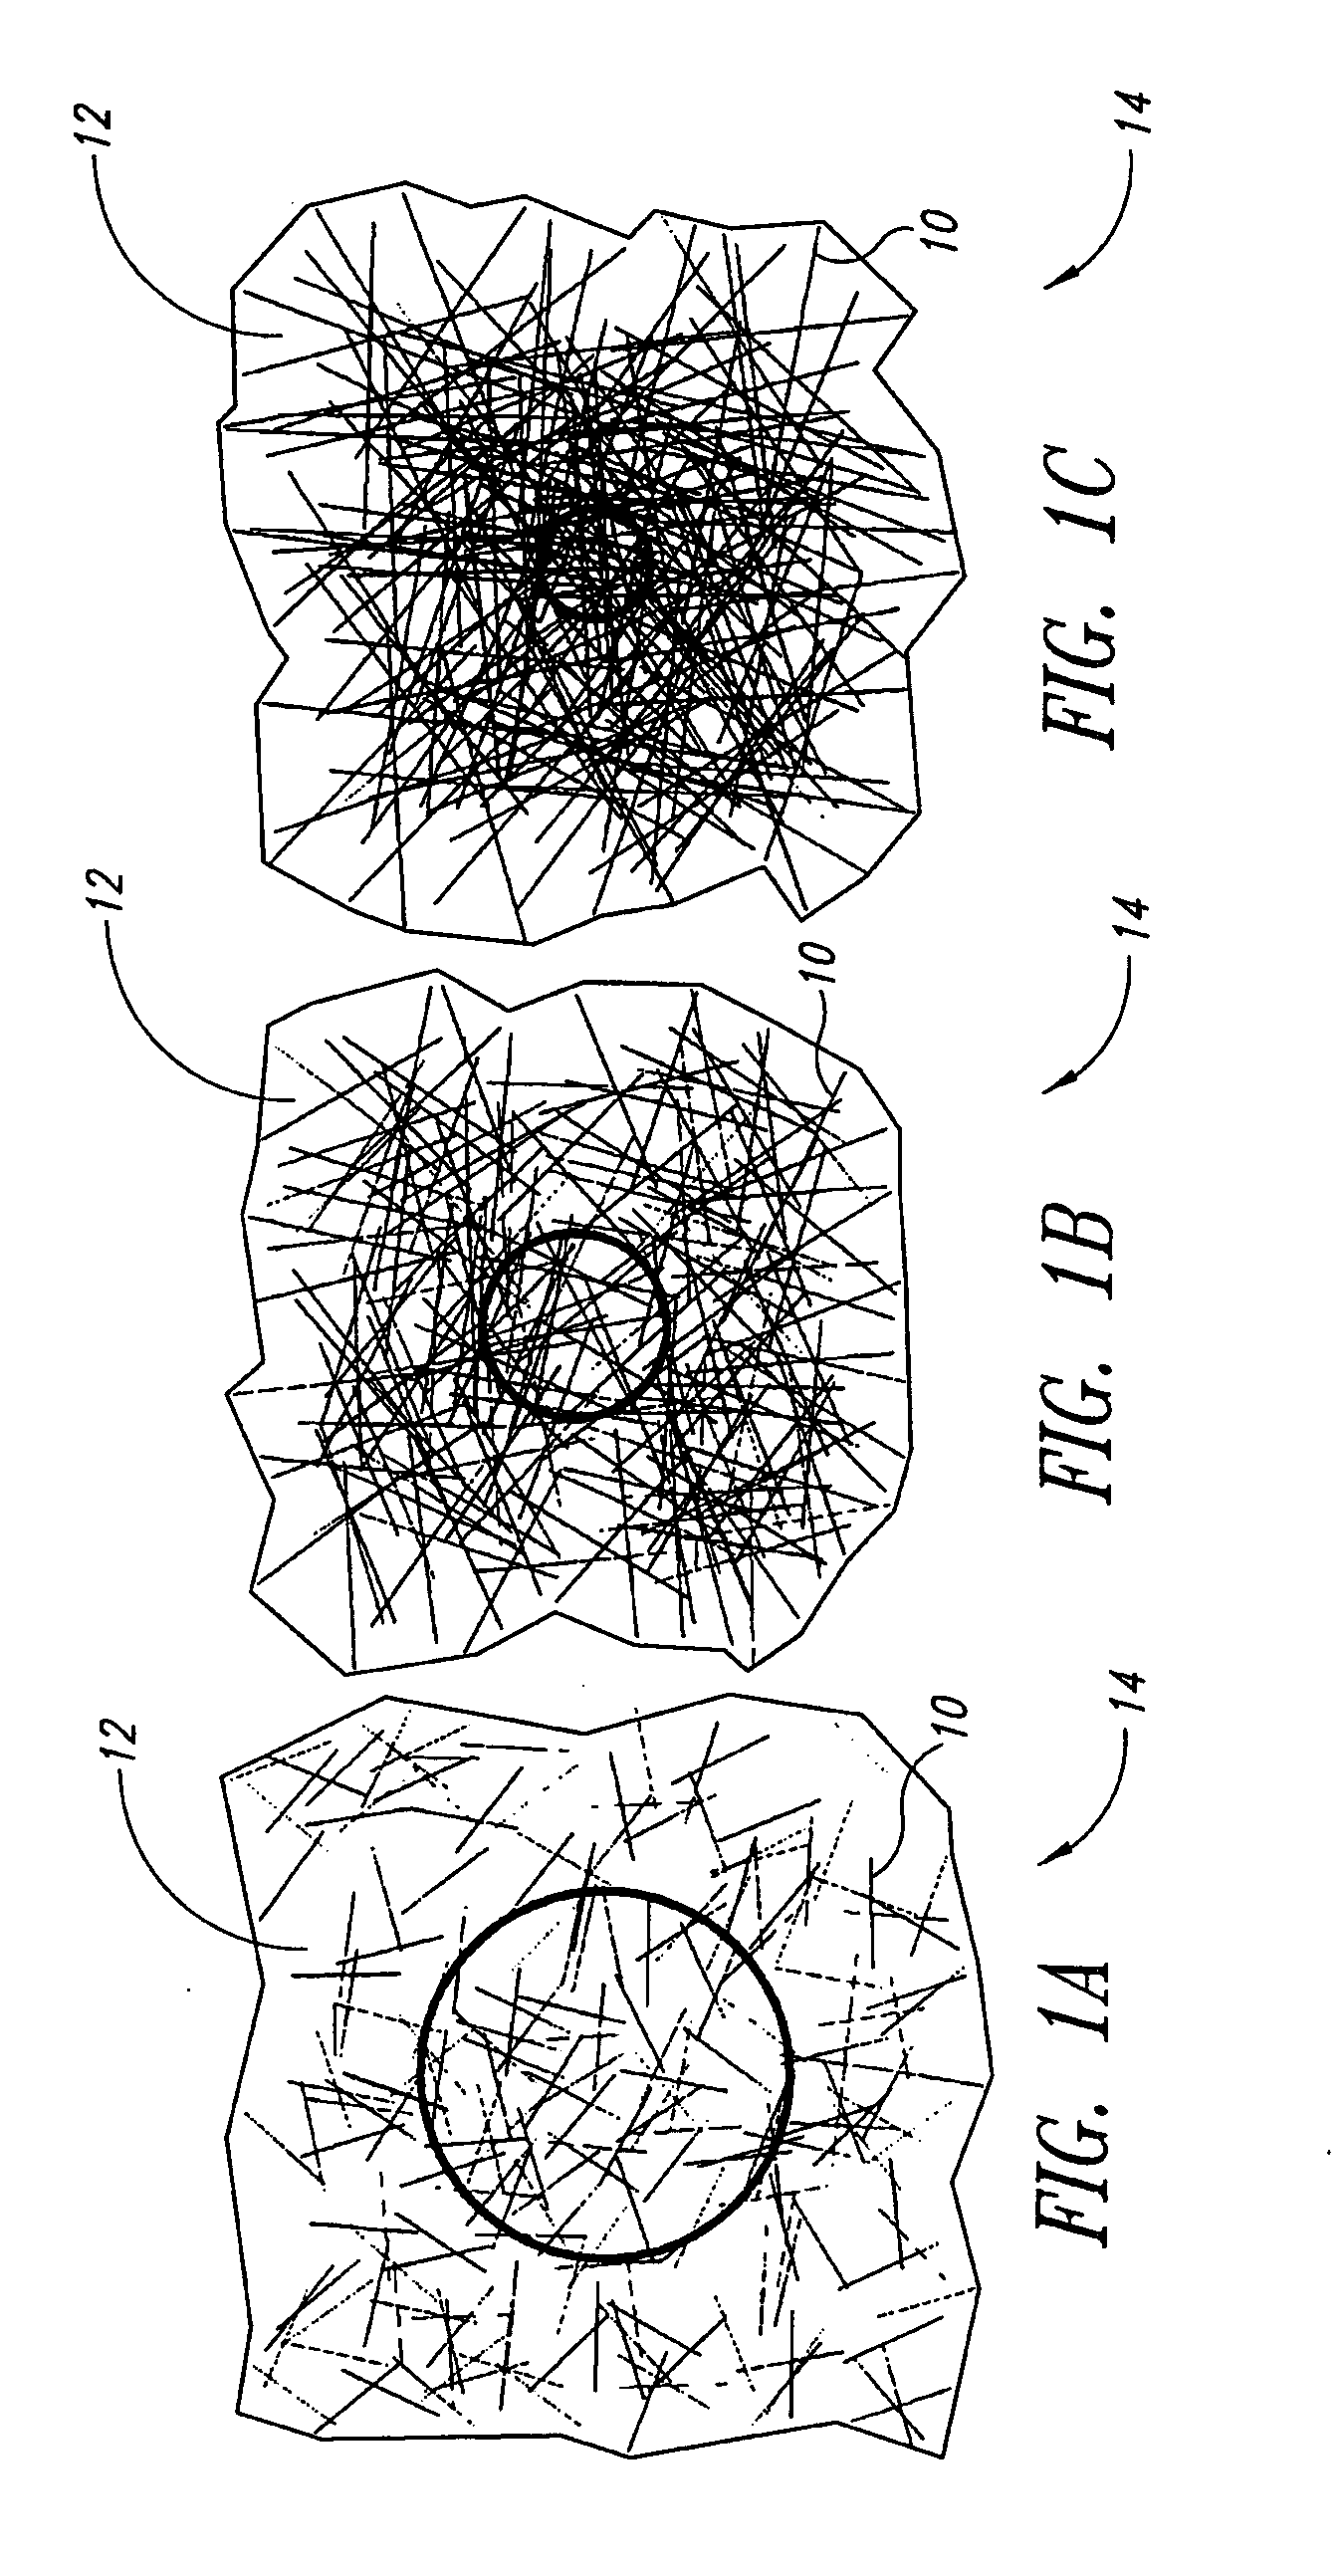 Systems, devices, and methods for controlling electrical and optical properties of transparent conductors